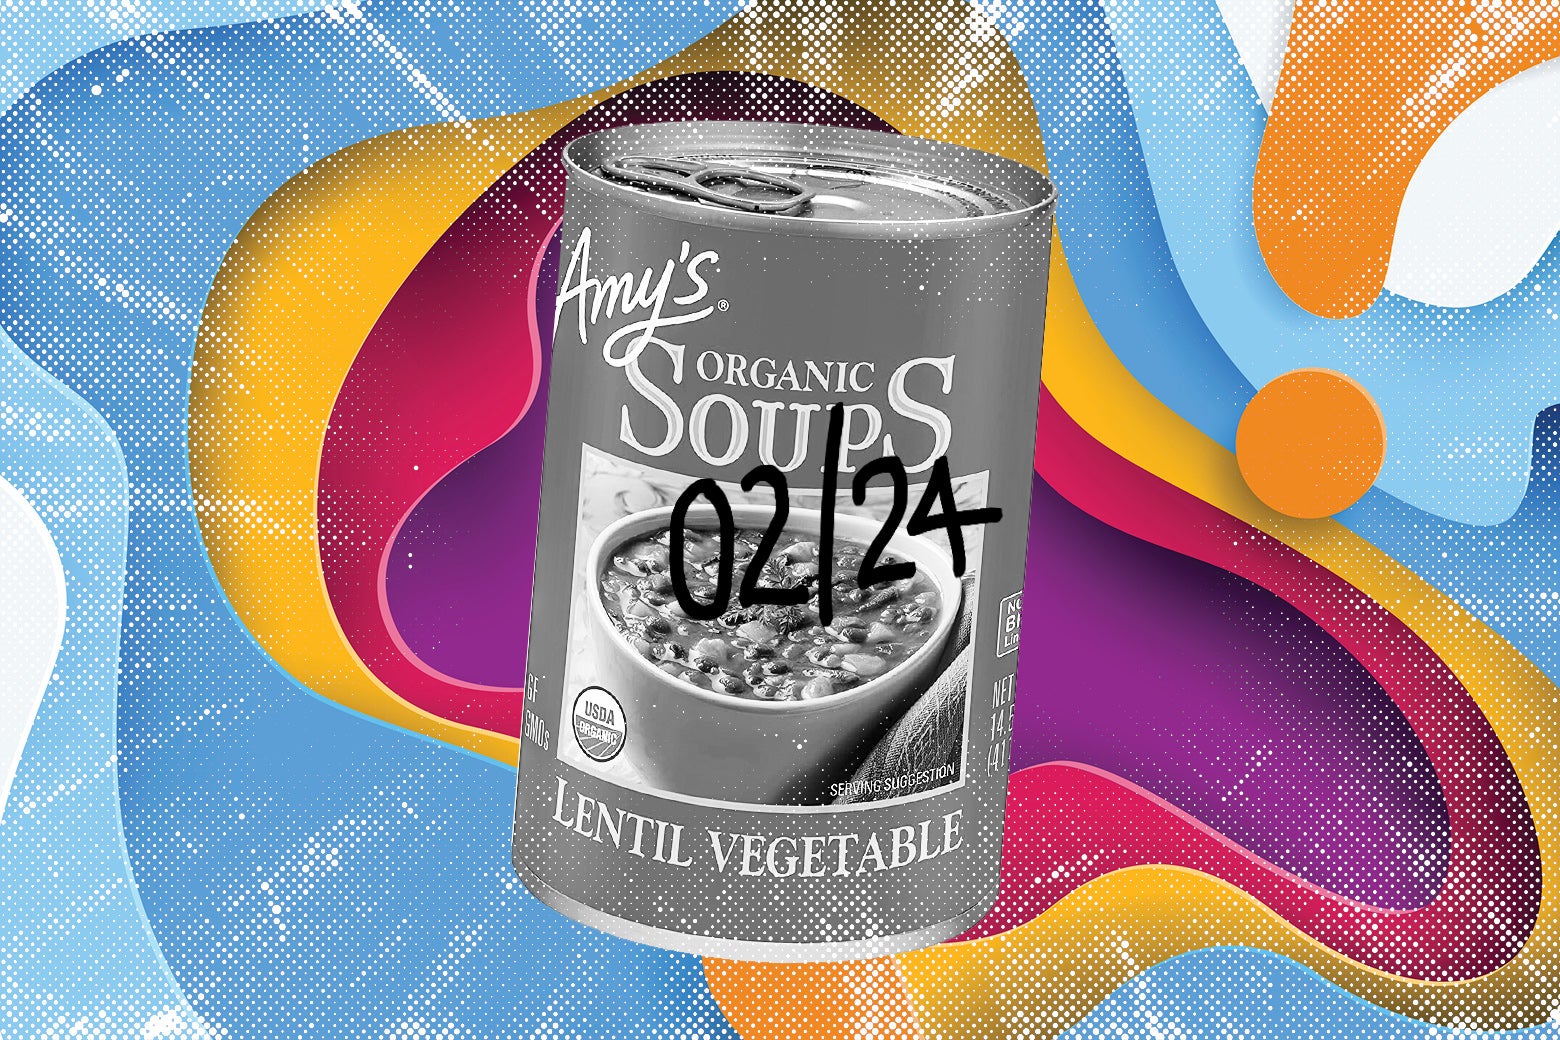 A can of soup amid a psychedelic swirl has a date handwritten on it in Sharpie marker. 